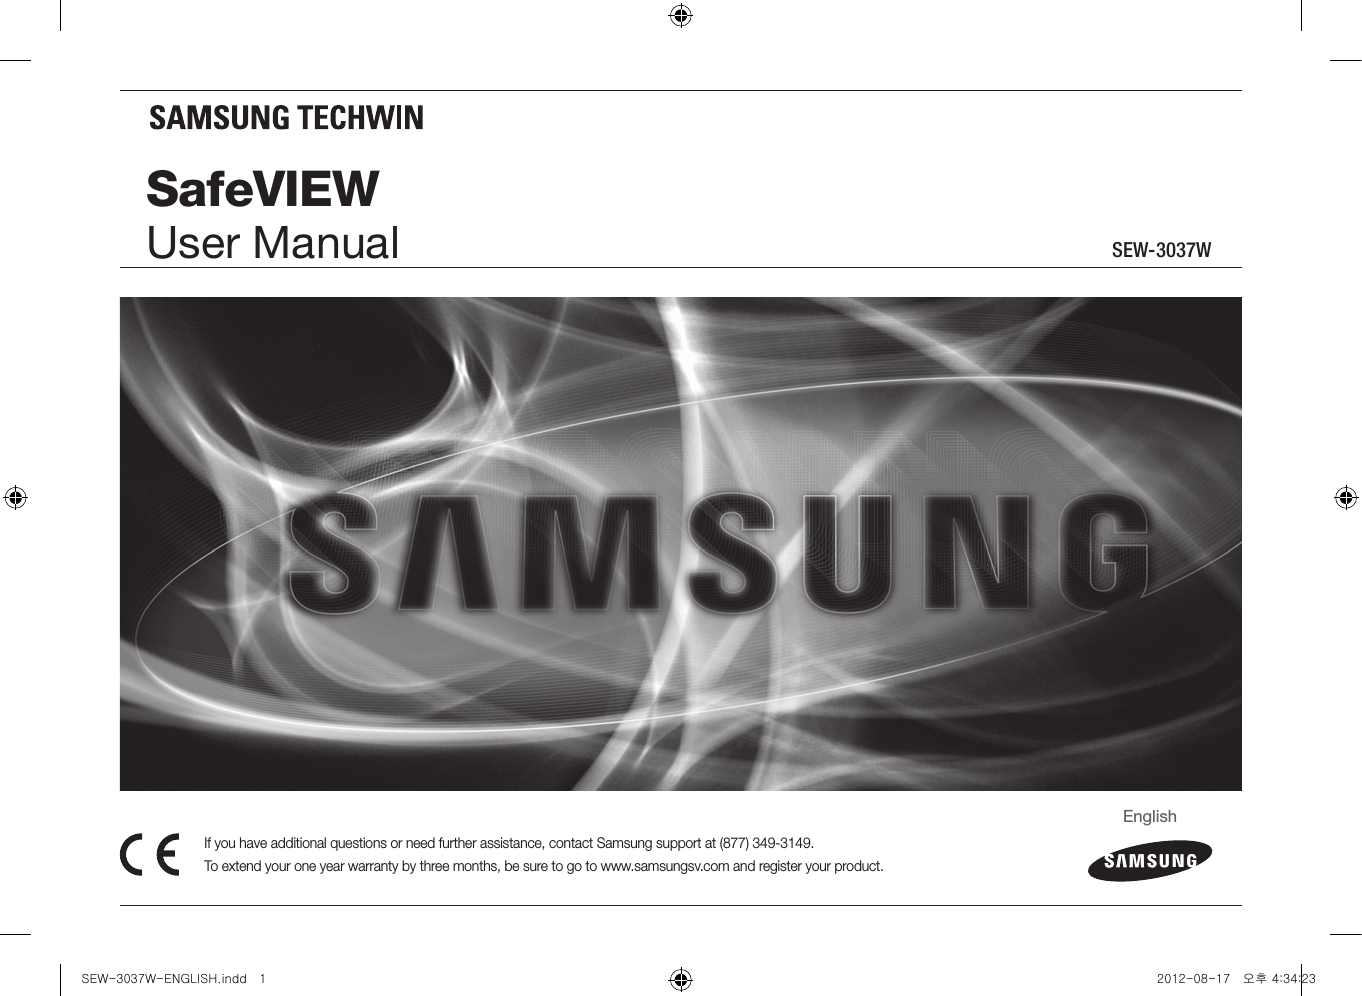 SEW-3037WIf you have additional questions or need further assistance, contact Samsung support at (877) 349-3149. To extend your one year warranty by three months, be sure to go to www.samsungsv.com and register your product.SafeVIEWUser ManualEnglishSEW-3037W-ENGLISH.indd   1 2012-08-17   오후 4:34:23